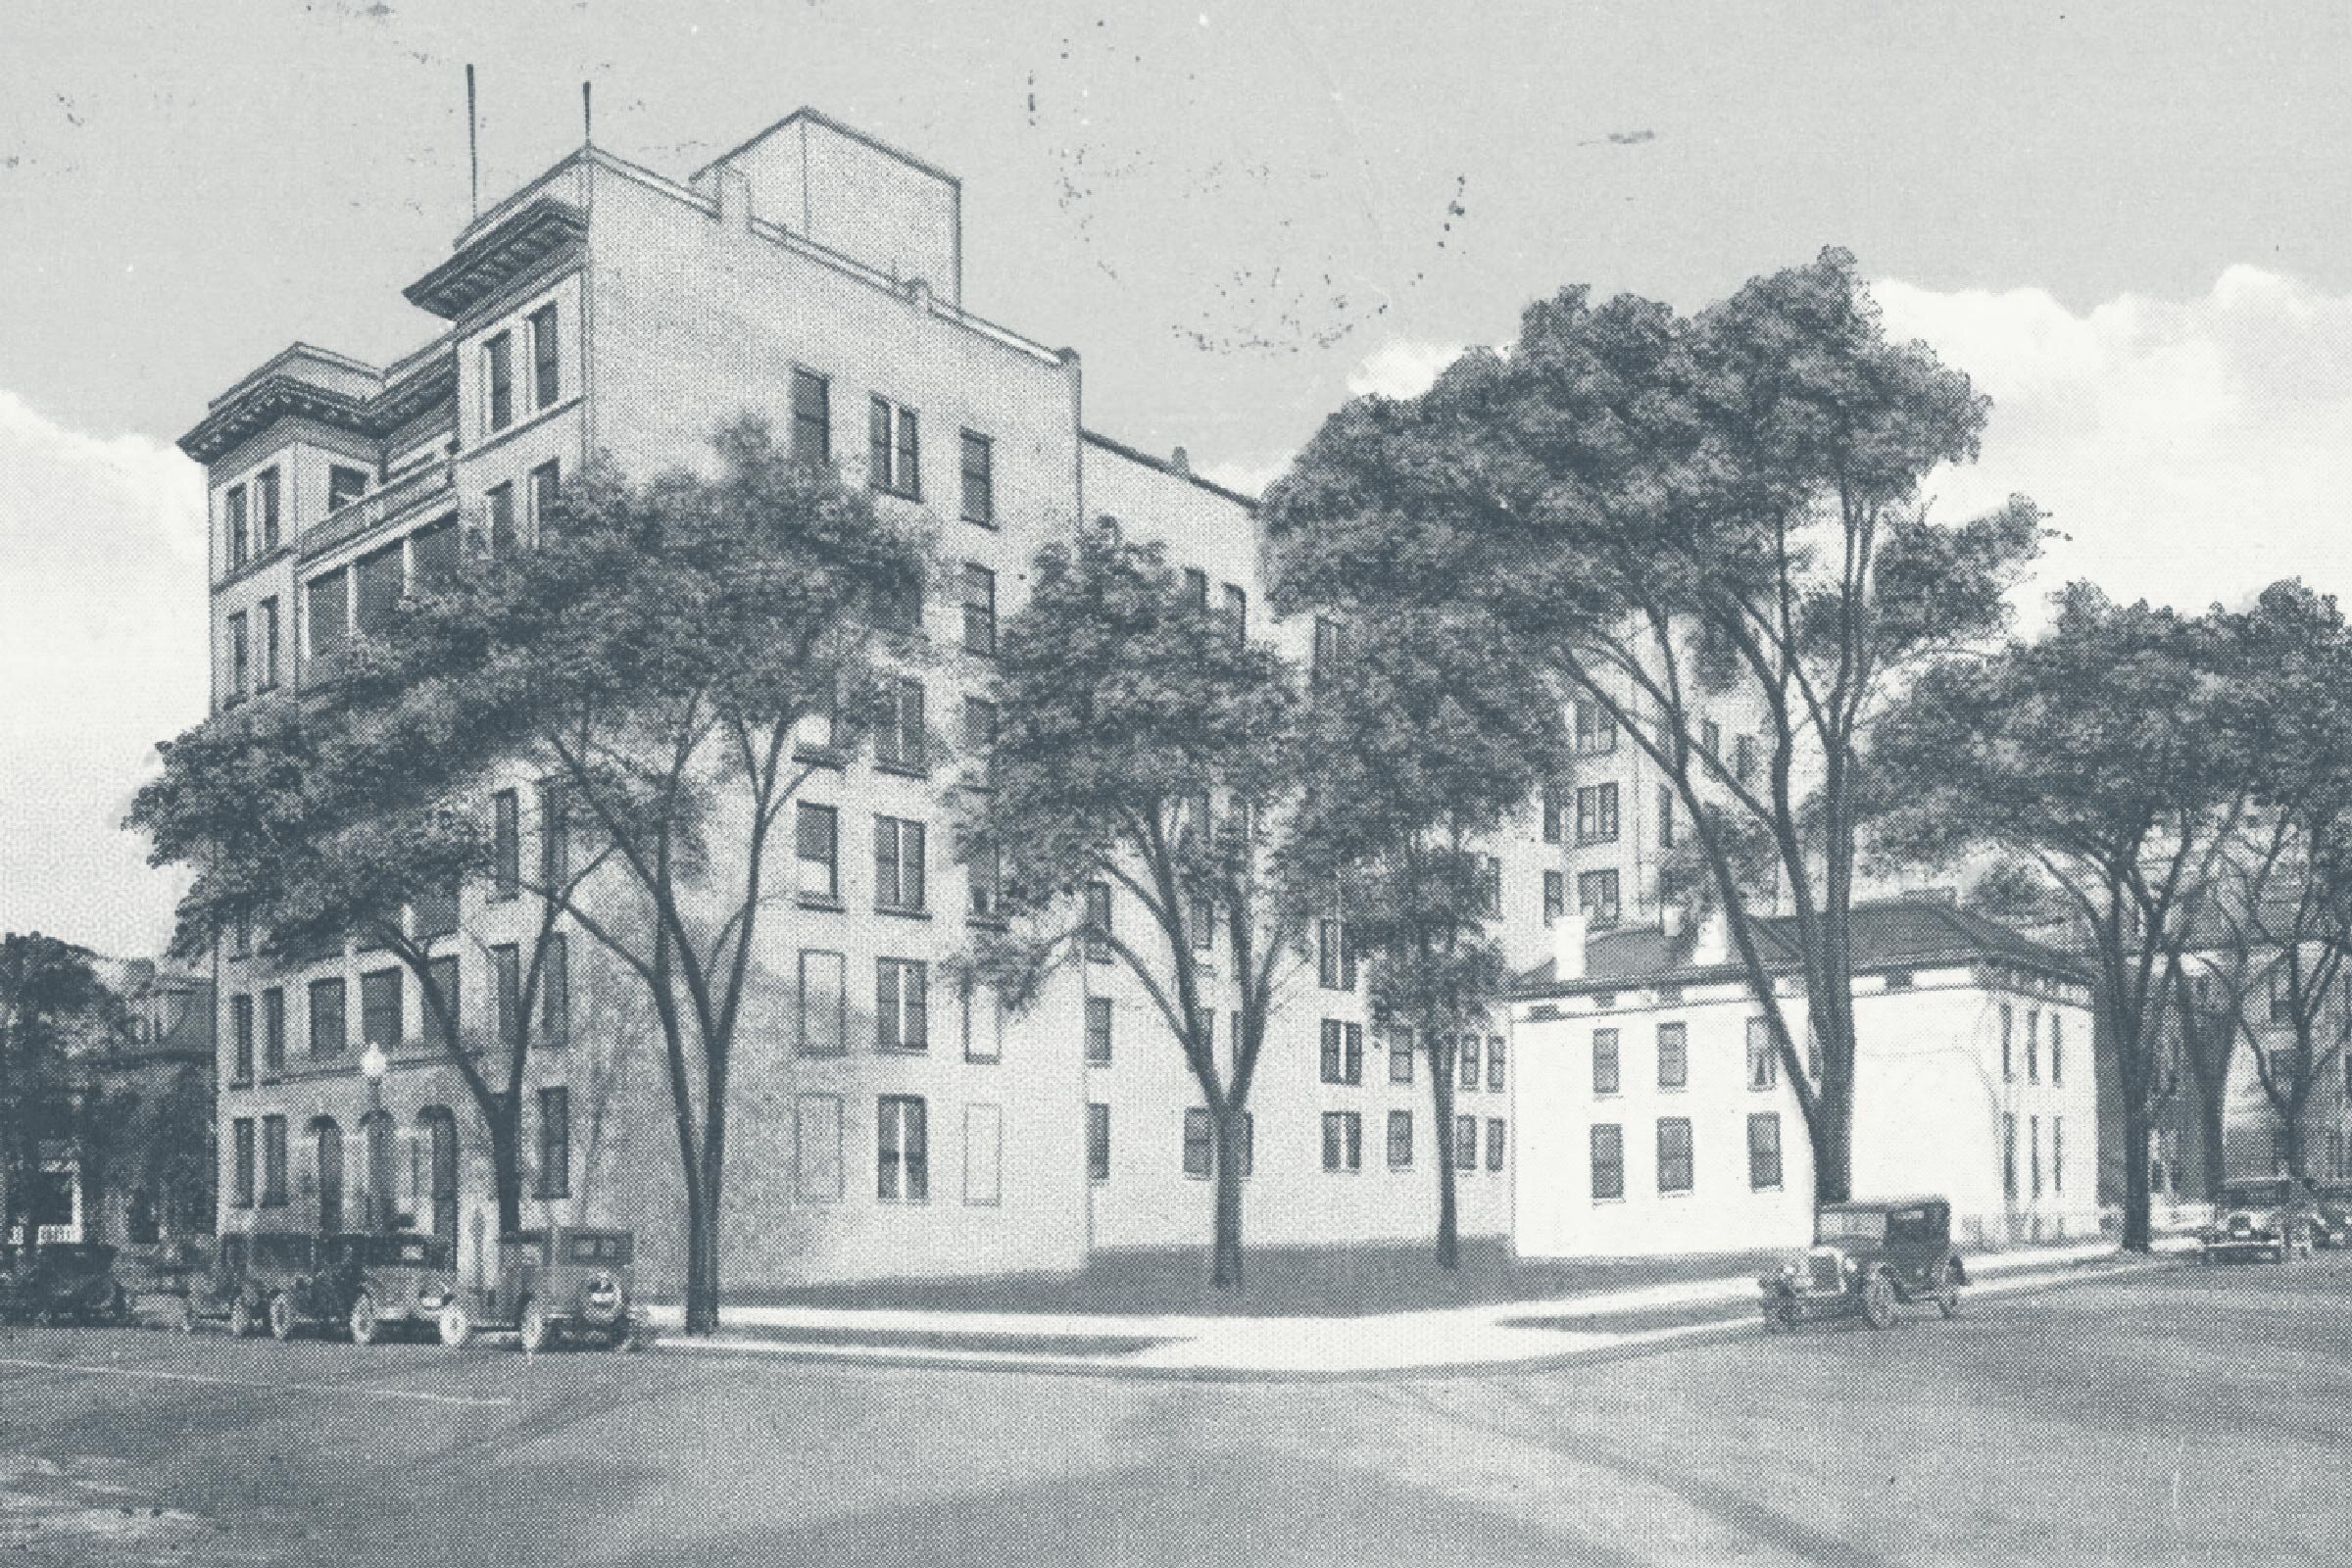 Grant Hospital, 1930. From the Reeb, Deibel, Ruffing Columbus Postcard Collection at Columbus Metropolitan Library.